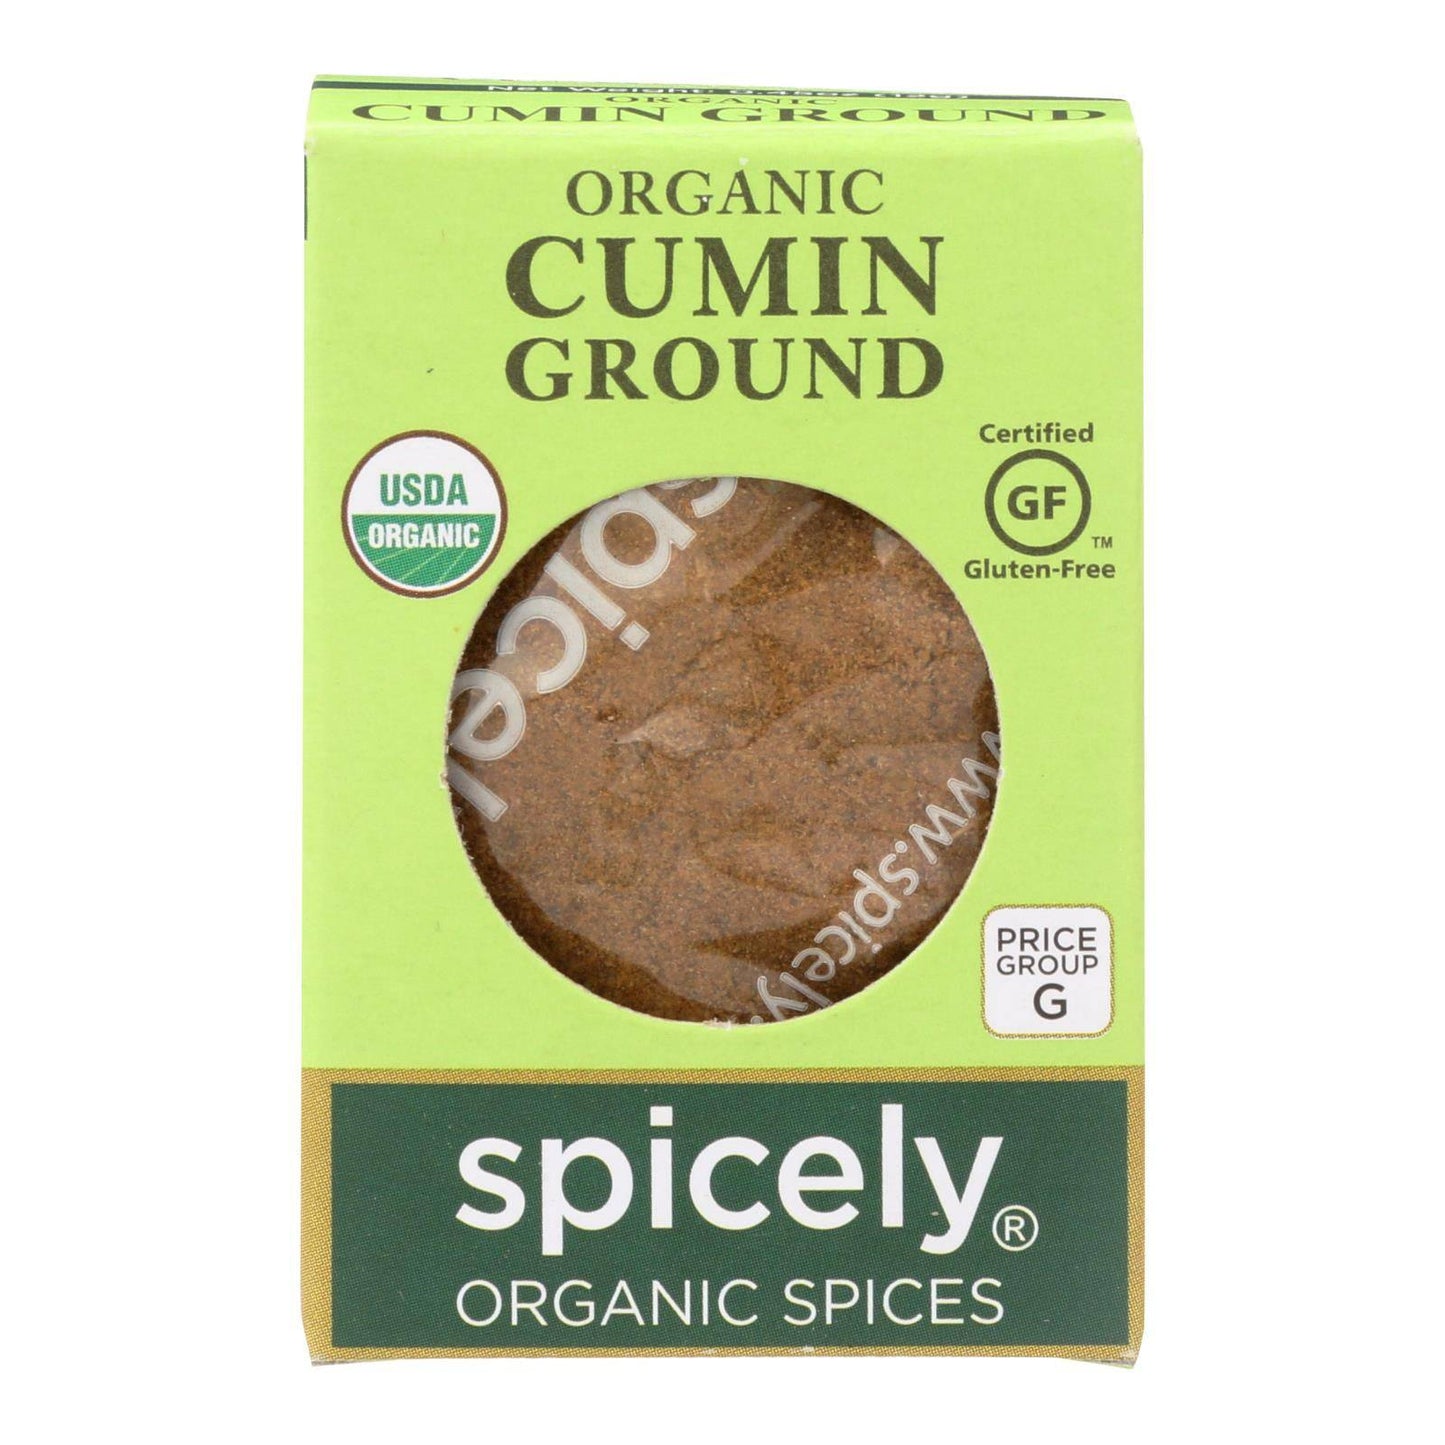 Buy Spicely Organics - Organic Cumin - Ground - Case Of 6 - 0.45 Oz.  at OnlyNaturals.us